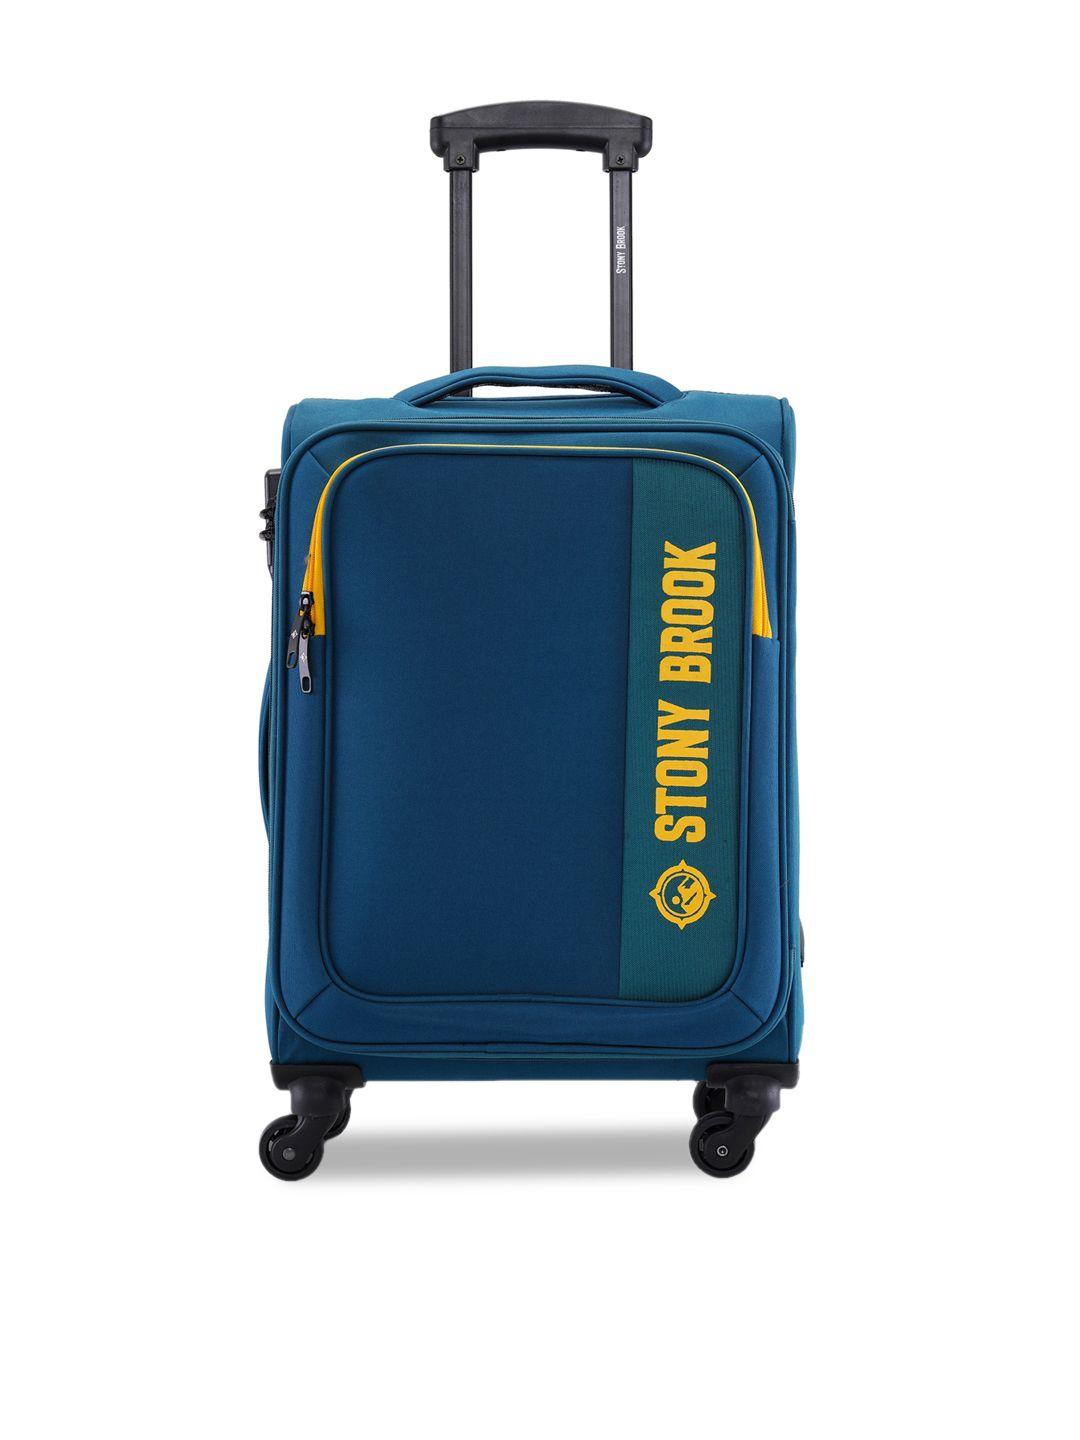 stony brook by nasher miles soft-sided cabin trolley suitcases